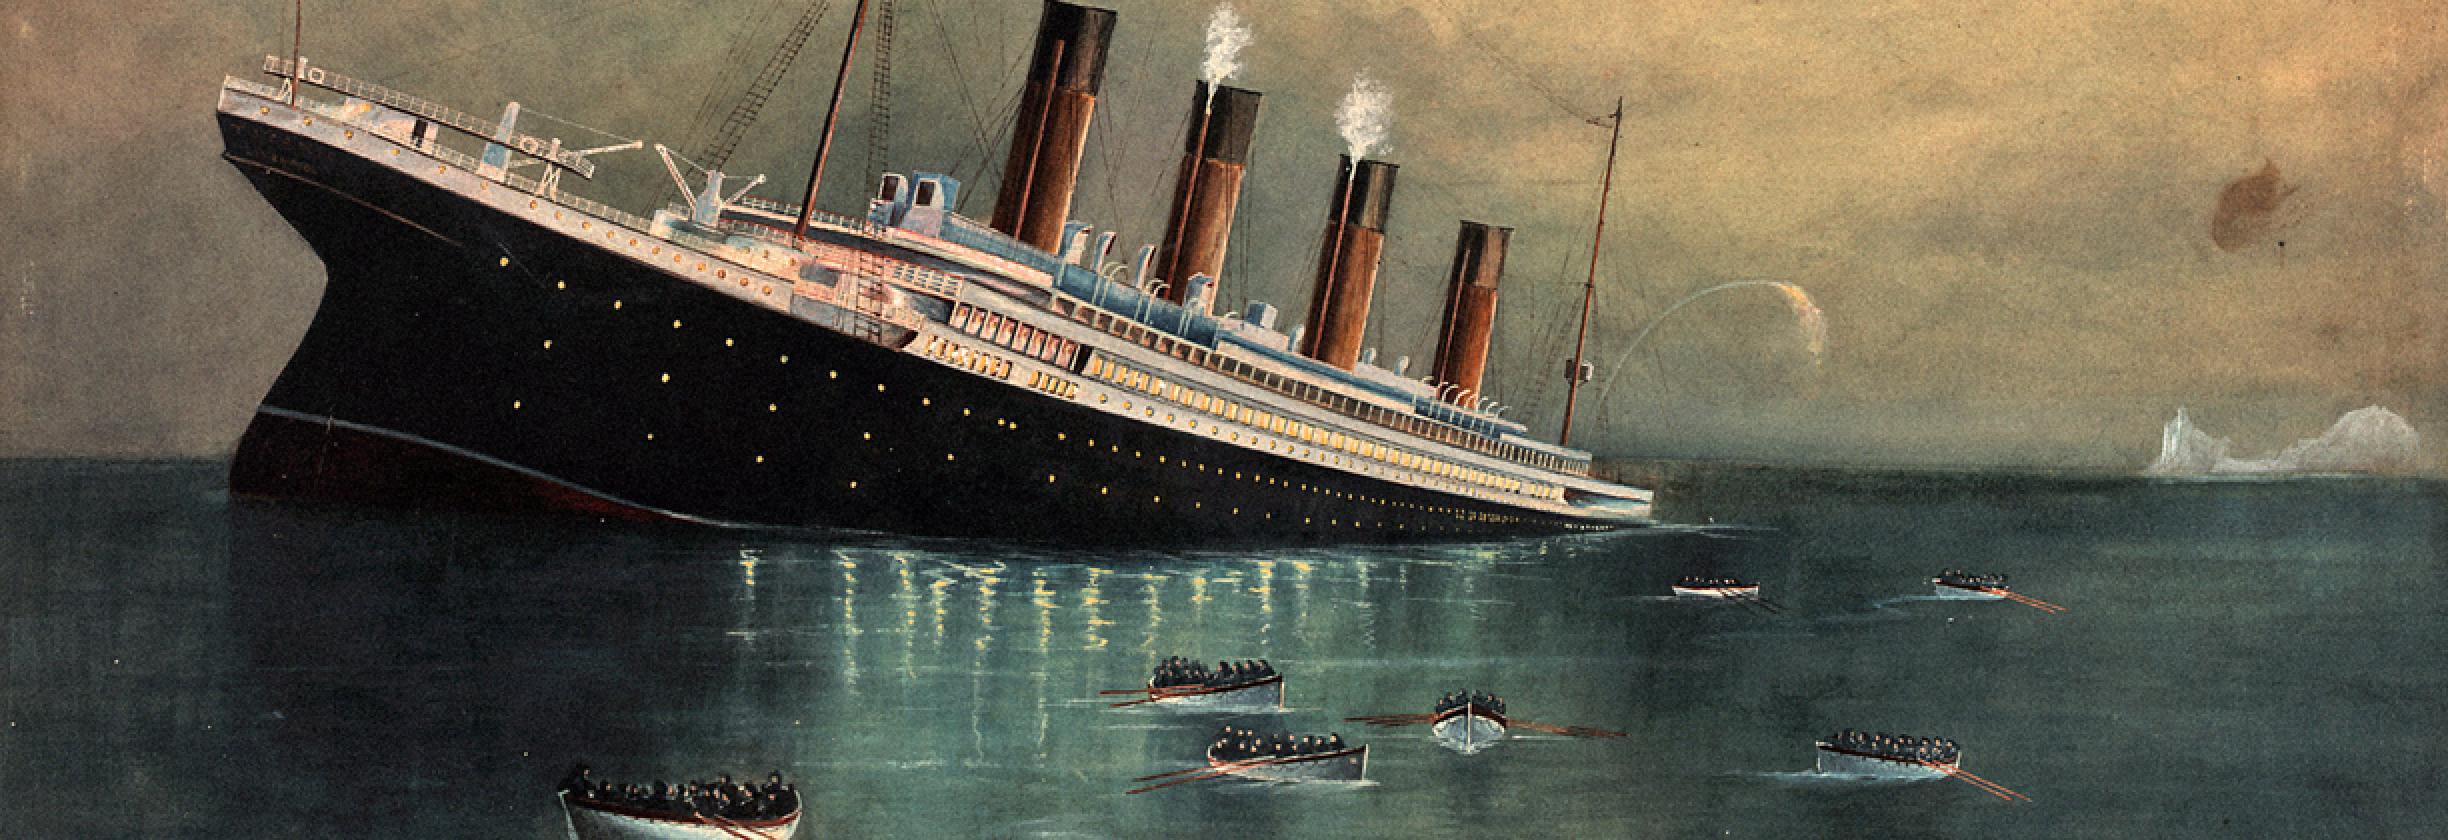 Would you get onboard the Titanic II?